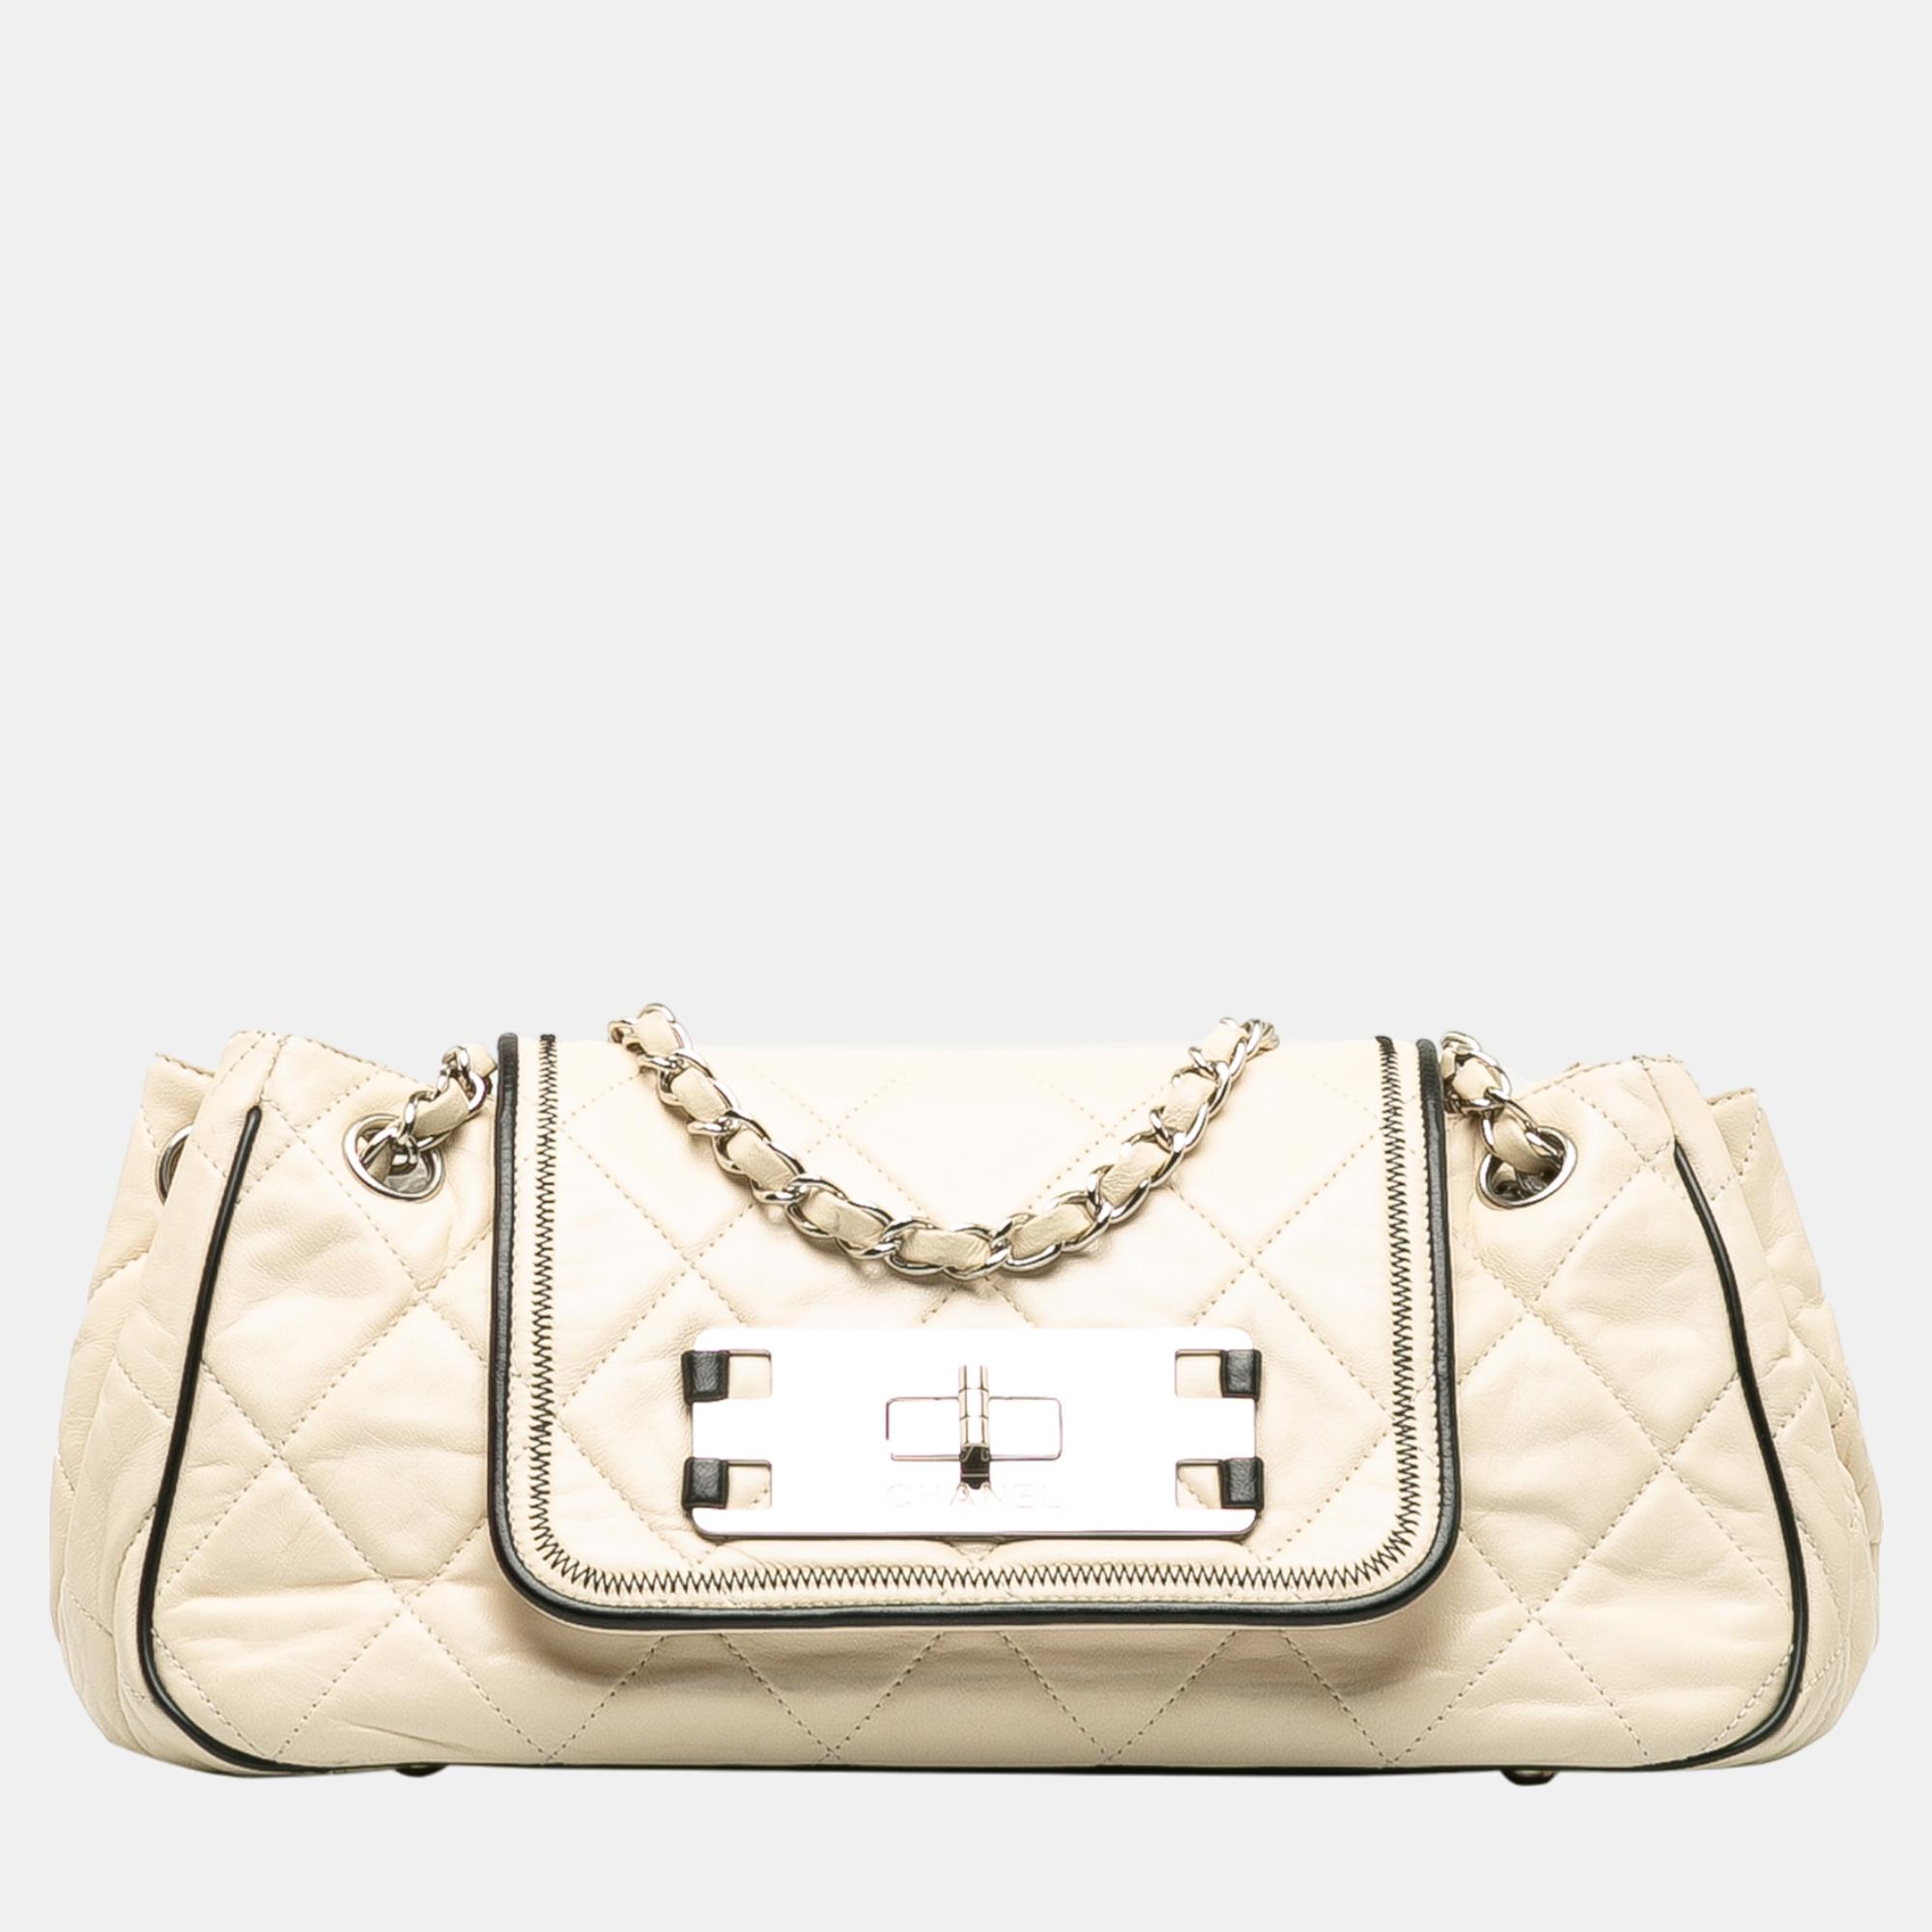 Chanel white accordion east/west